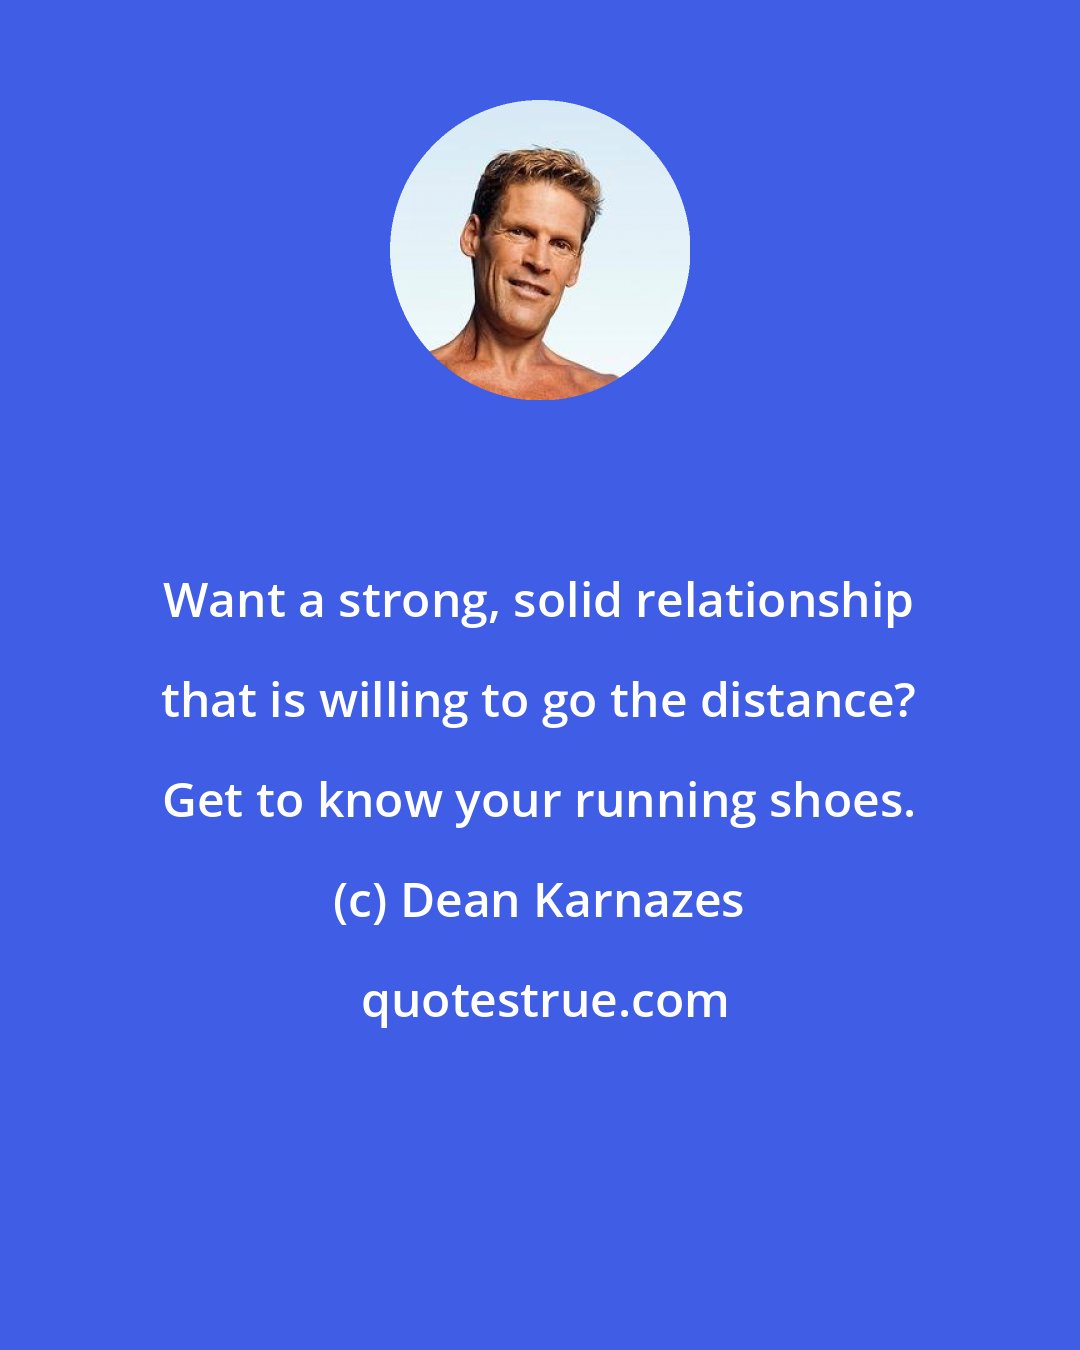 Dean Karnazes: Want a strong, solid relationship that is willing to go the distance? Get to know your running shoes.